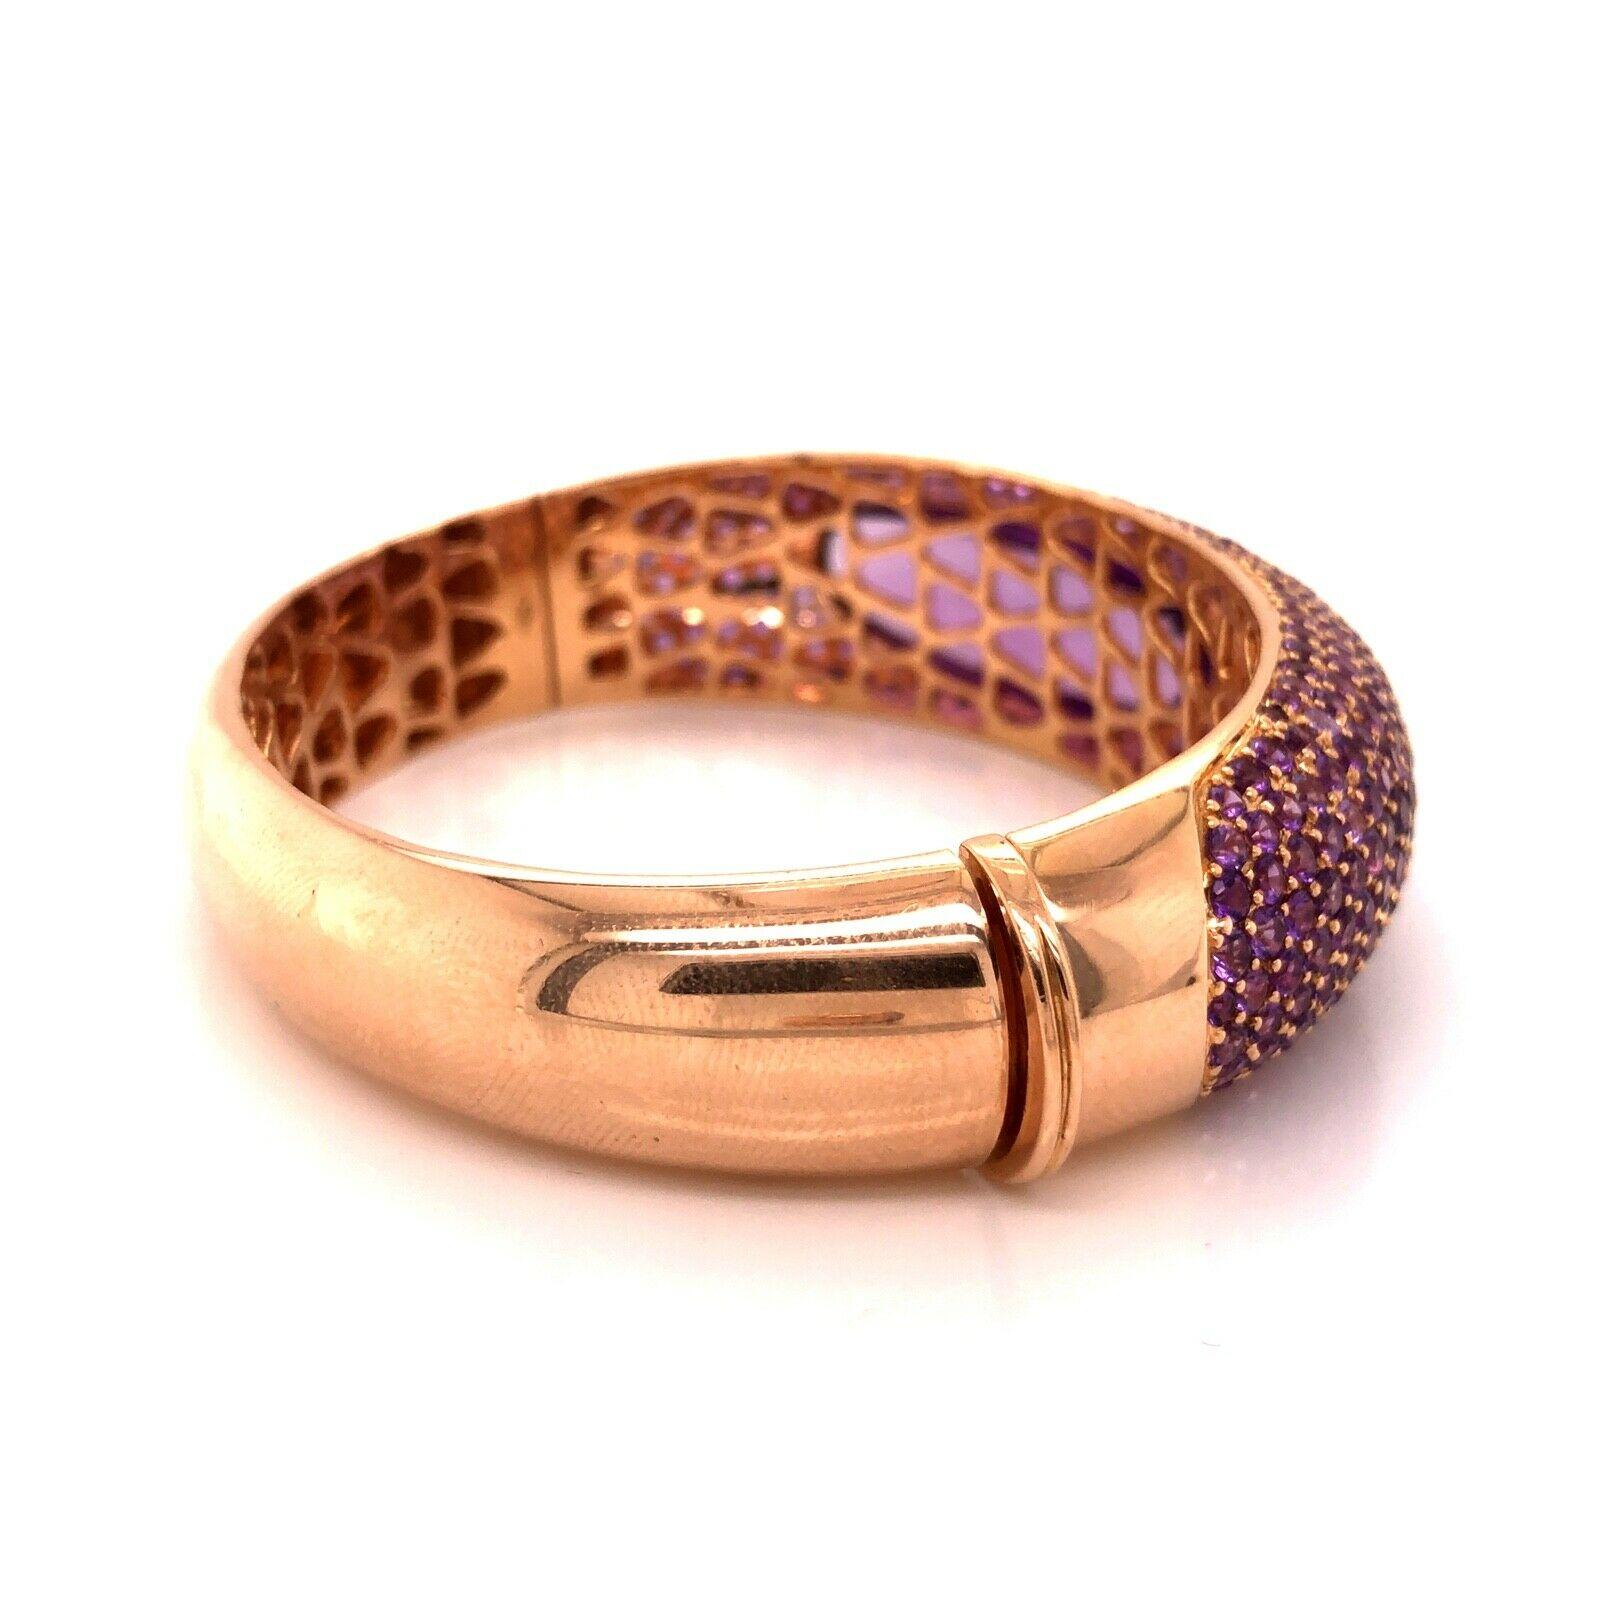 Beautiful creation from famed designer Roberto Coin. This elegant bangle/ bracelet is crafted in 18k rose gold showing a edgy look with Amethyst gemstones set throughout. This is the wider version of this design. The bangle is part of his Capri Plus